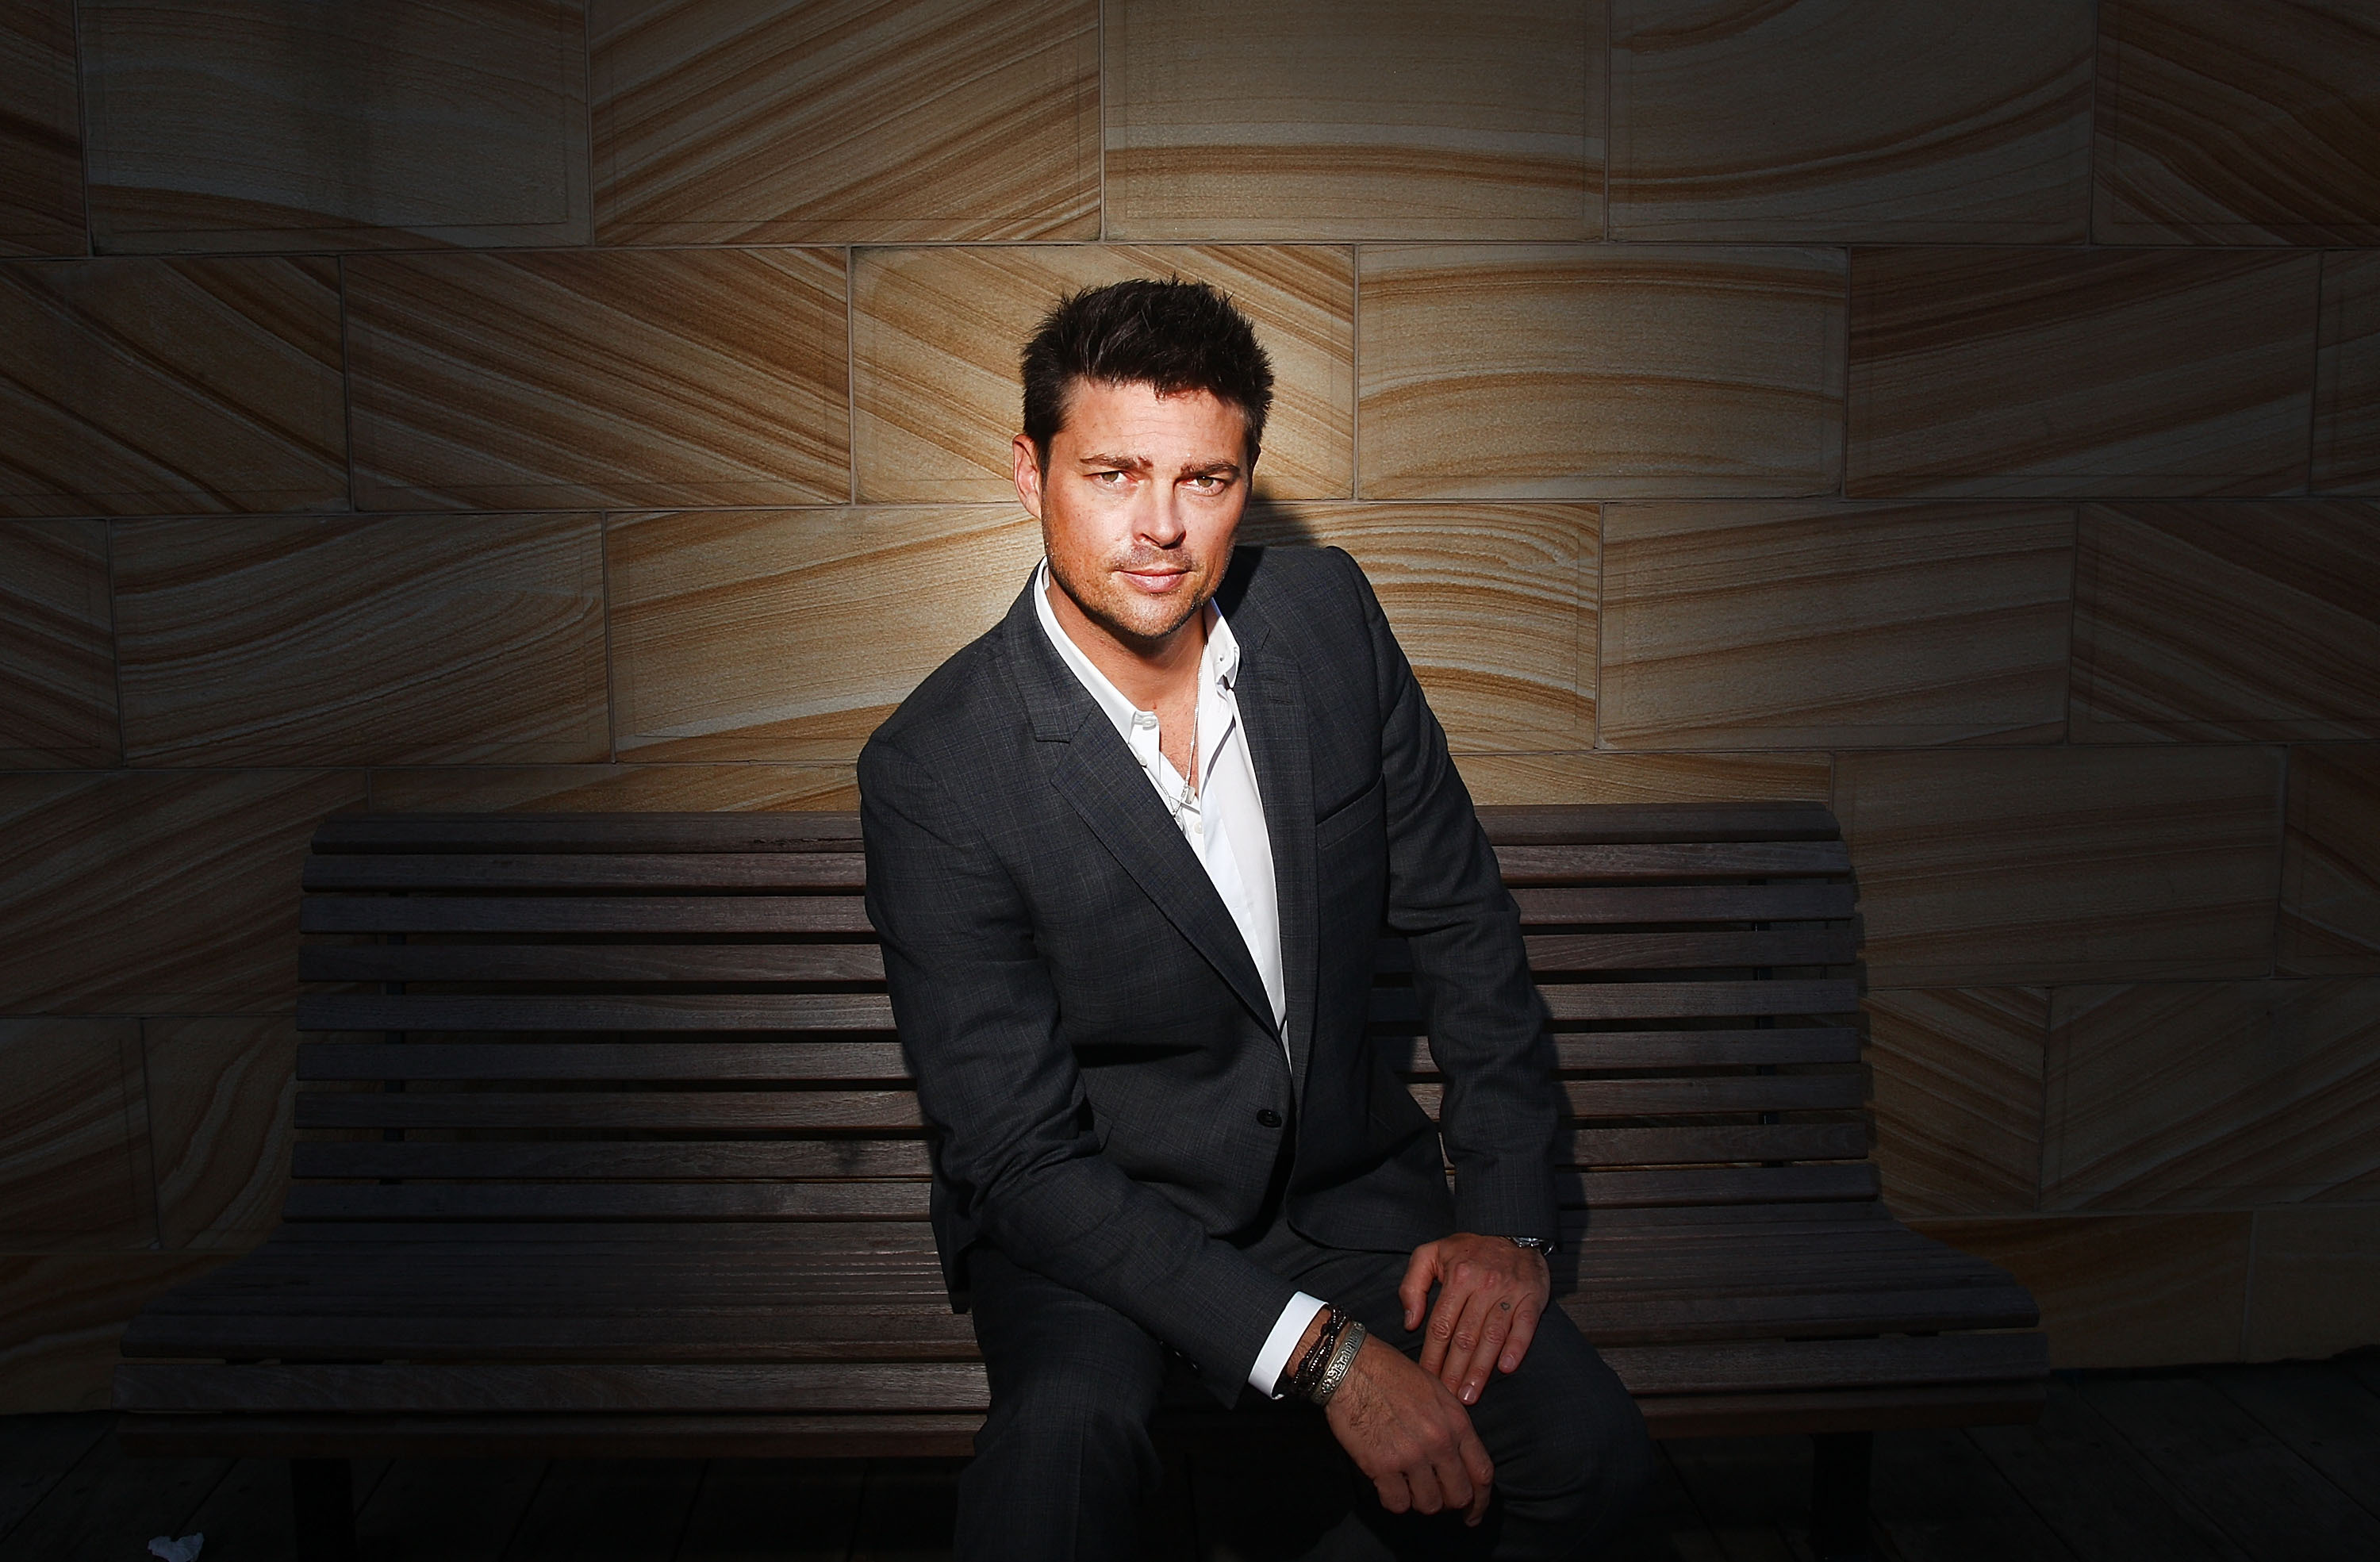 Karl Urban Wallpapers Images Photos Pictures Backgrounds3000 x 1969